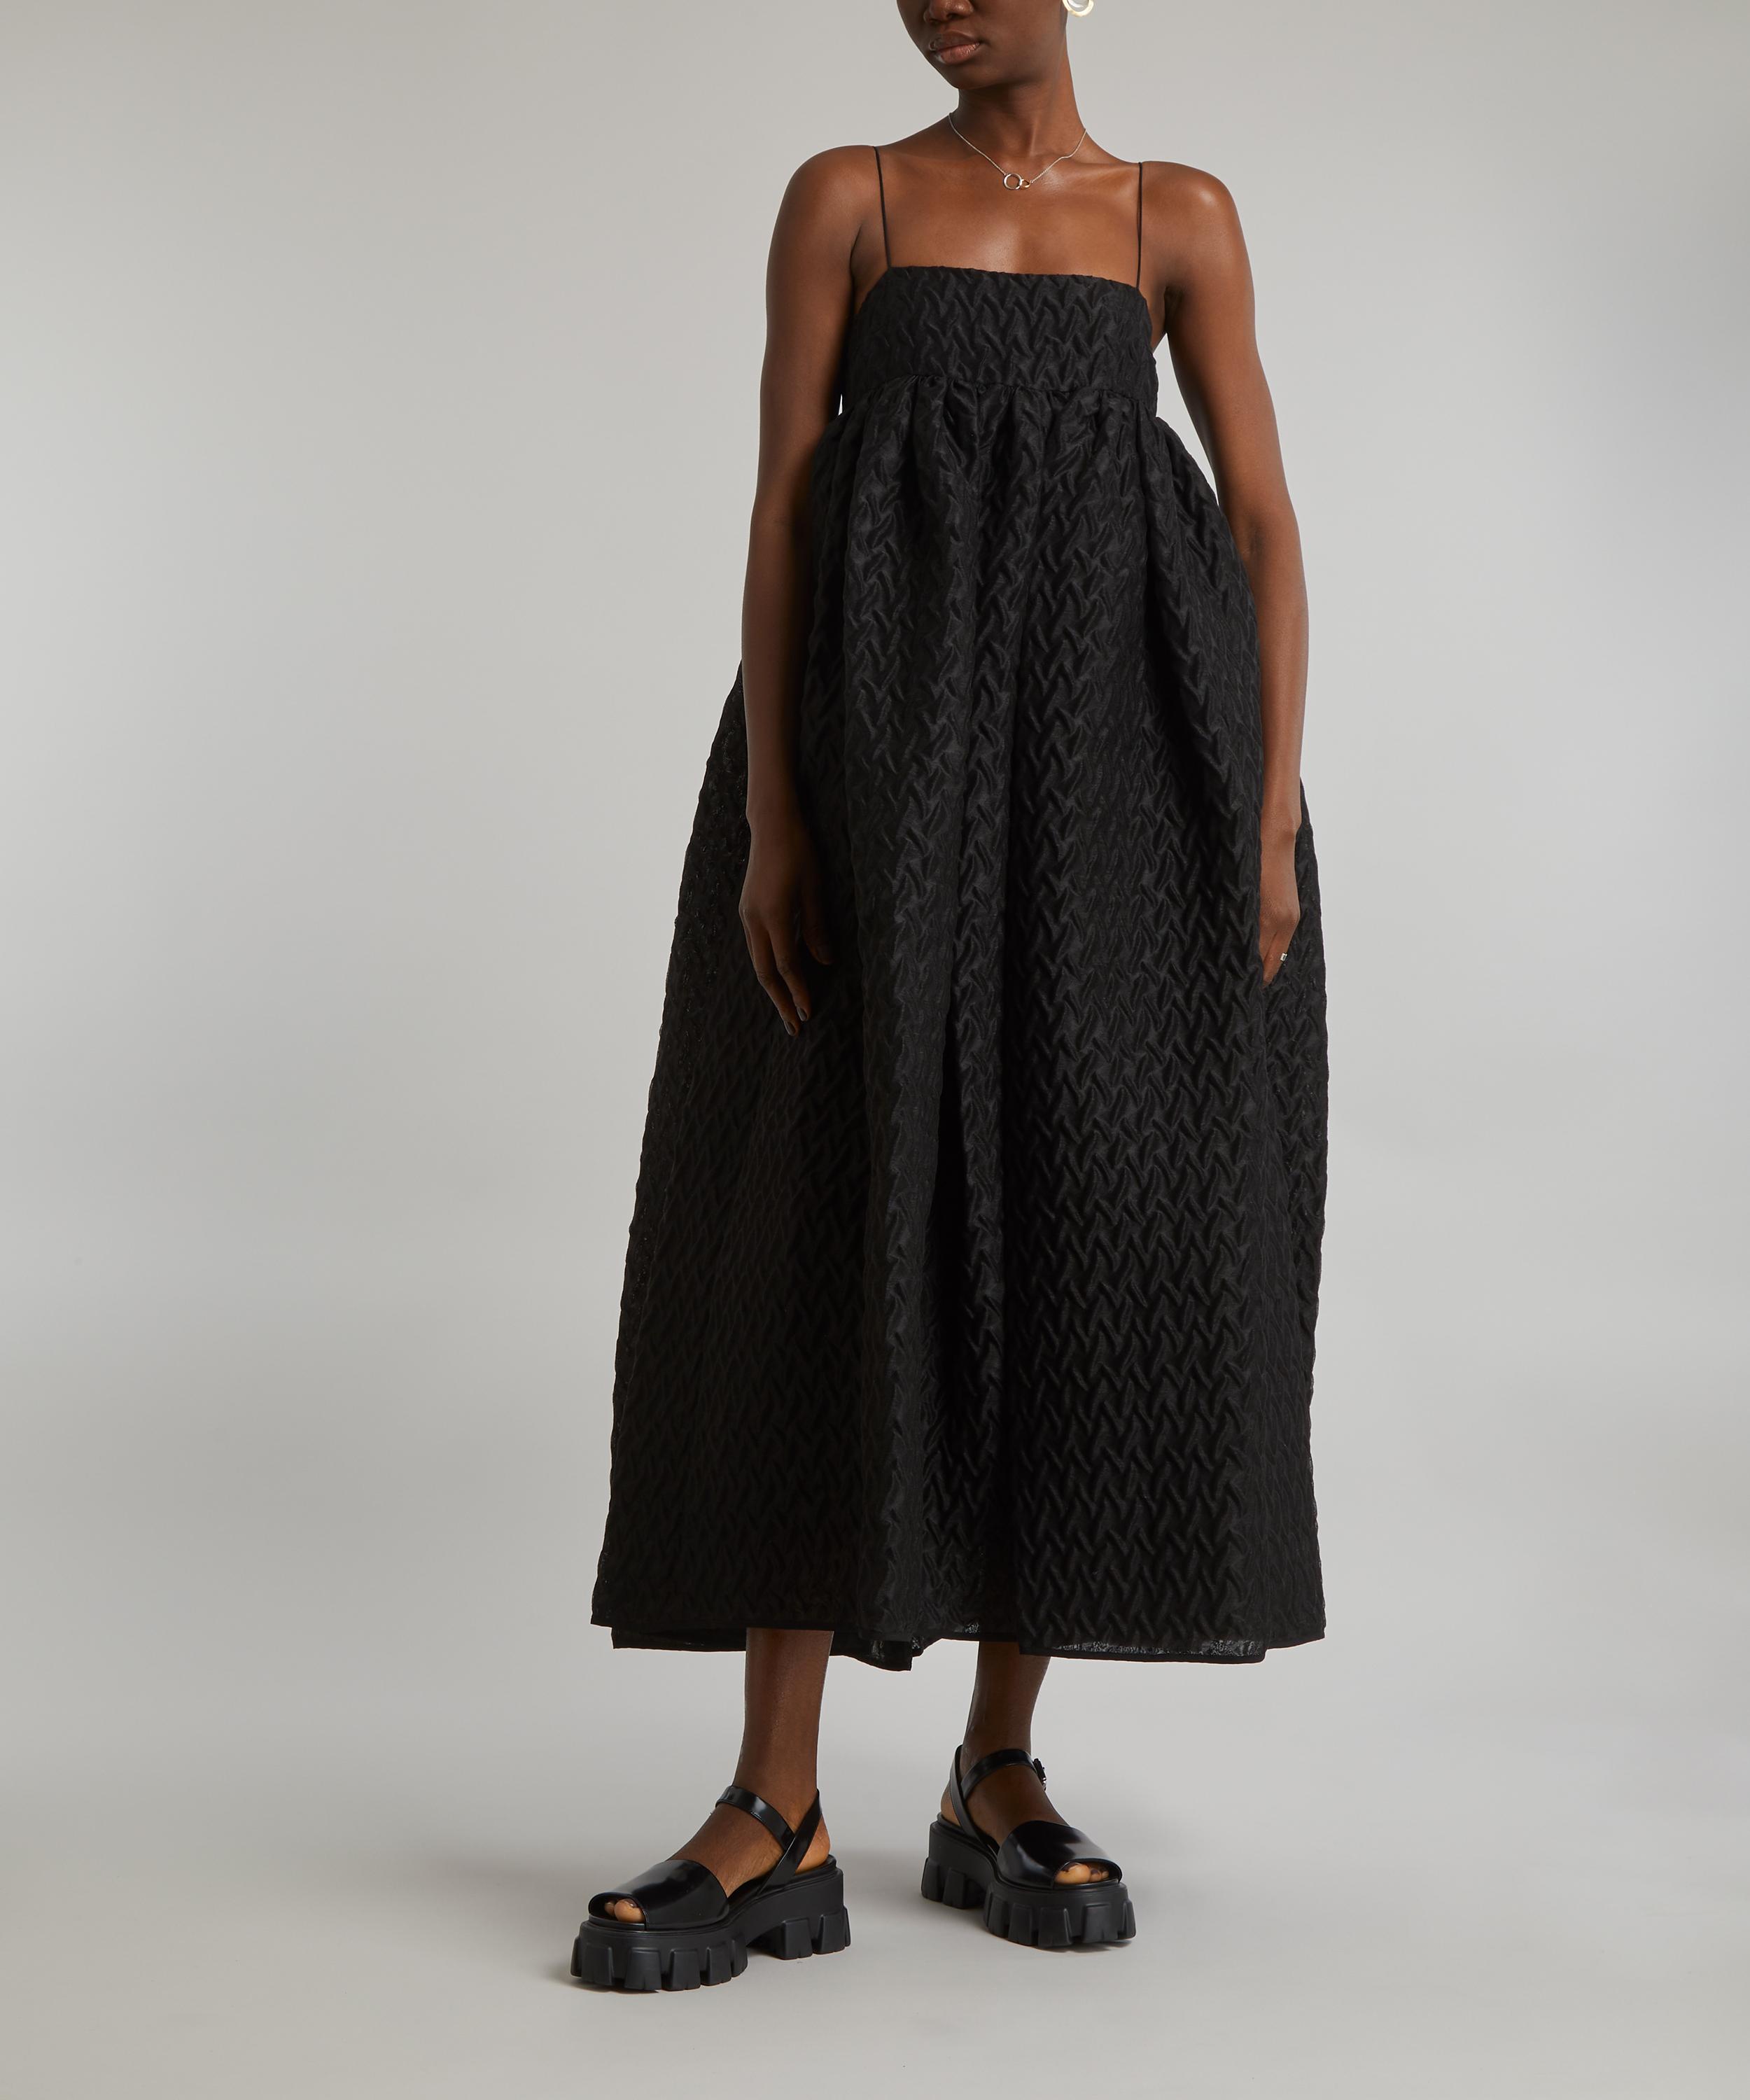 Cecilie Bahnsen at Liberty The Oversized Dresses Trend Liberty image